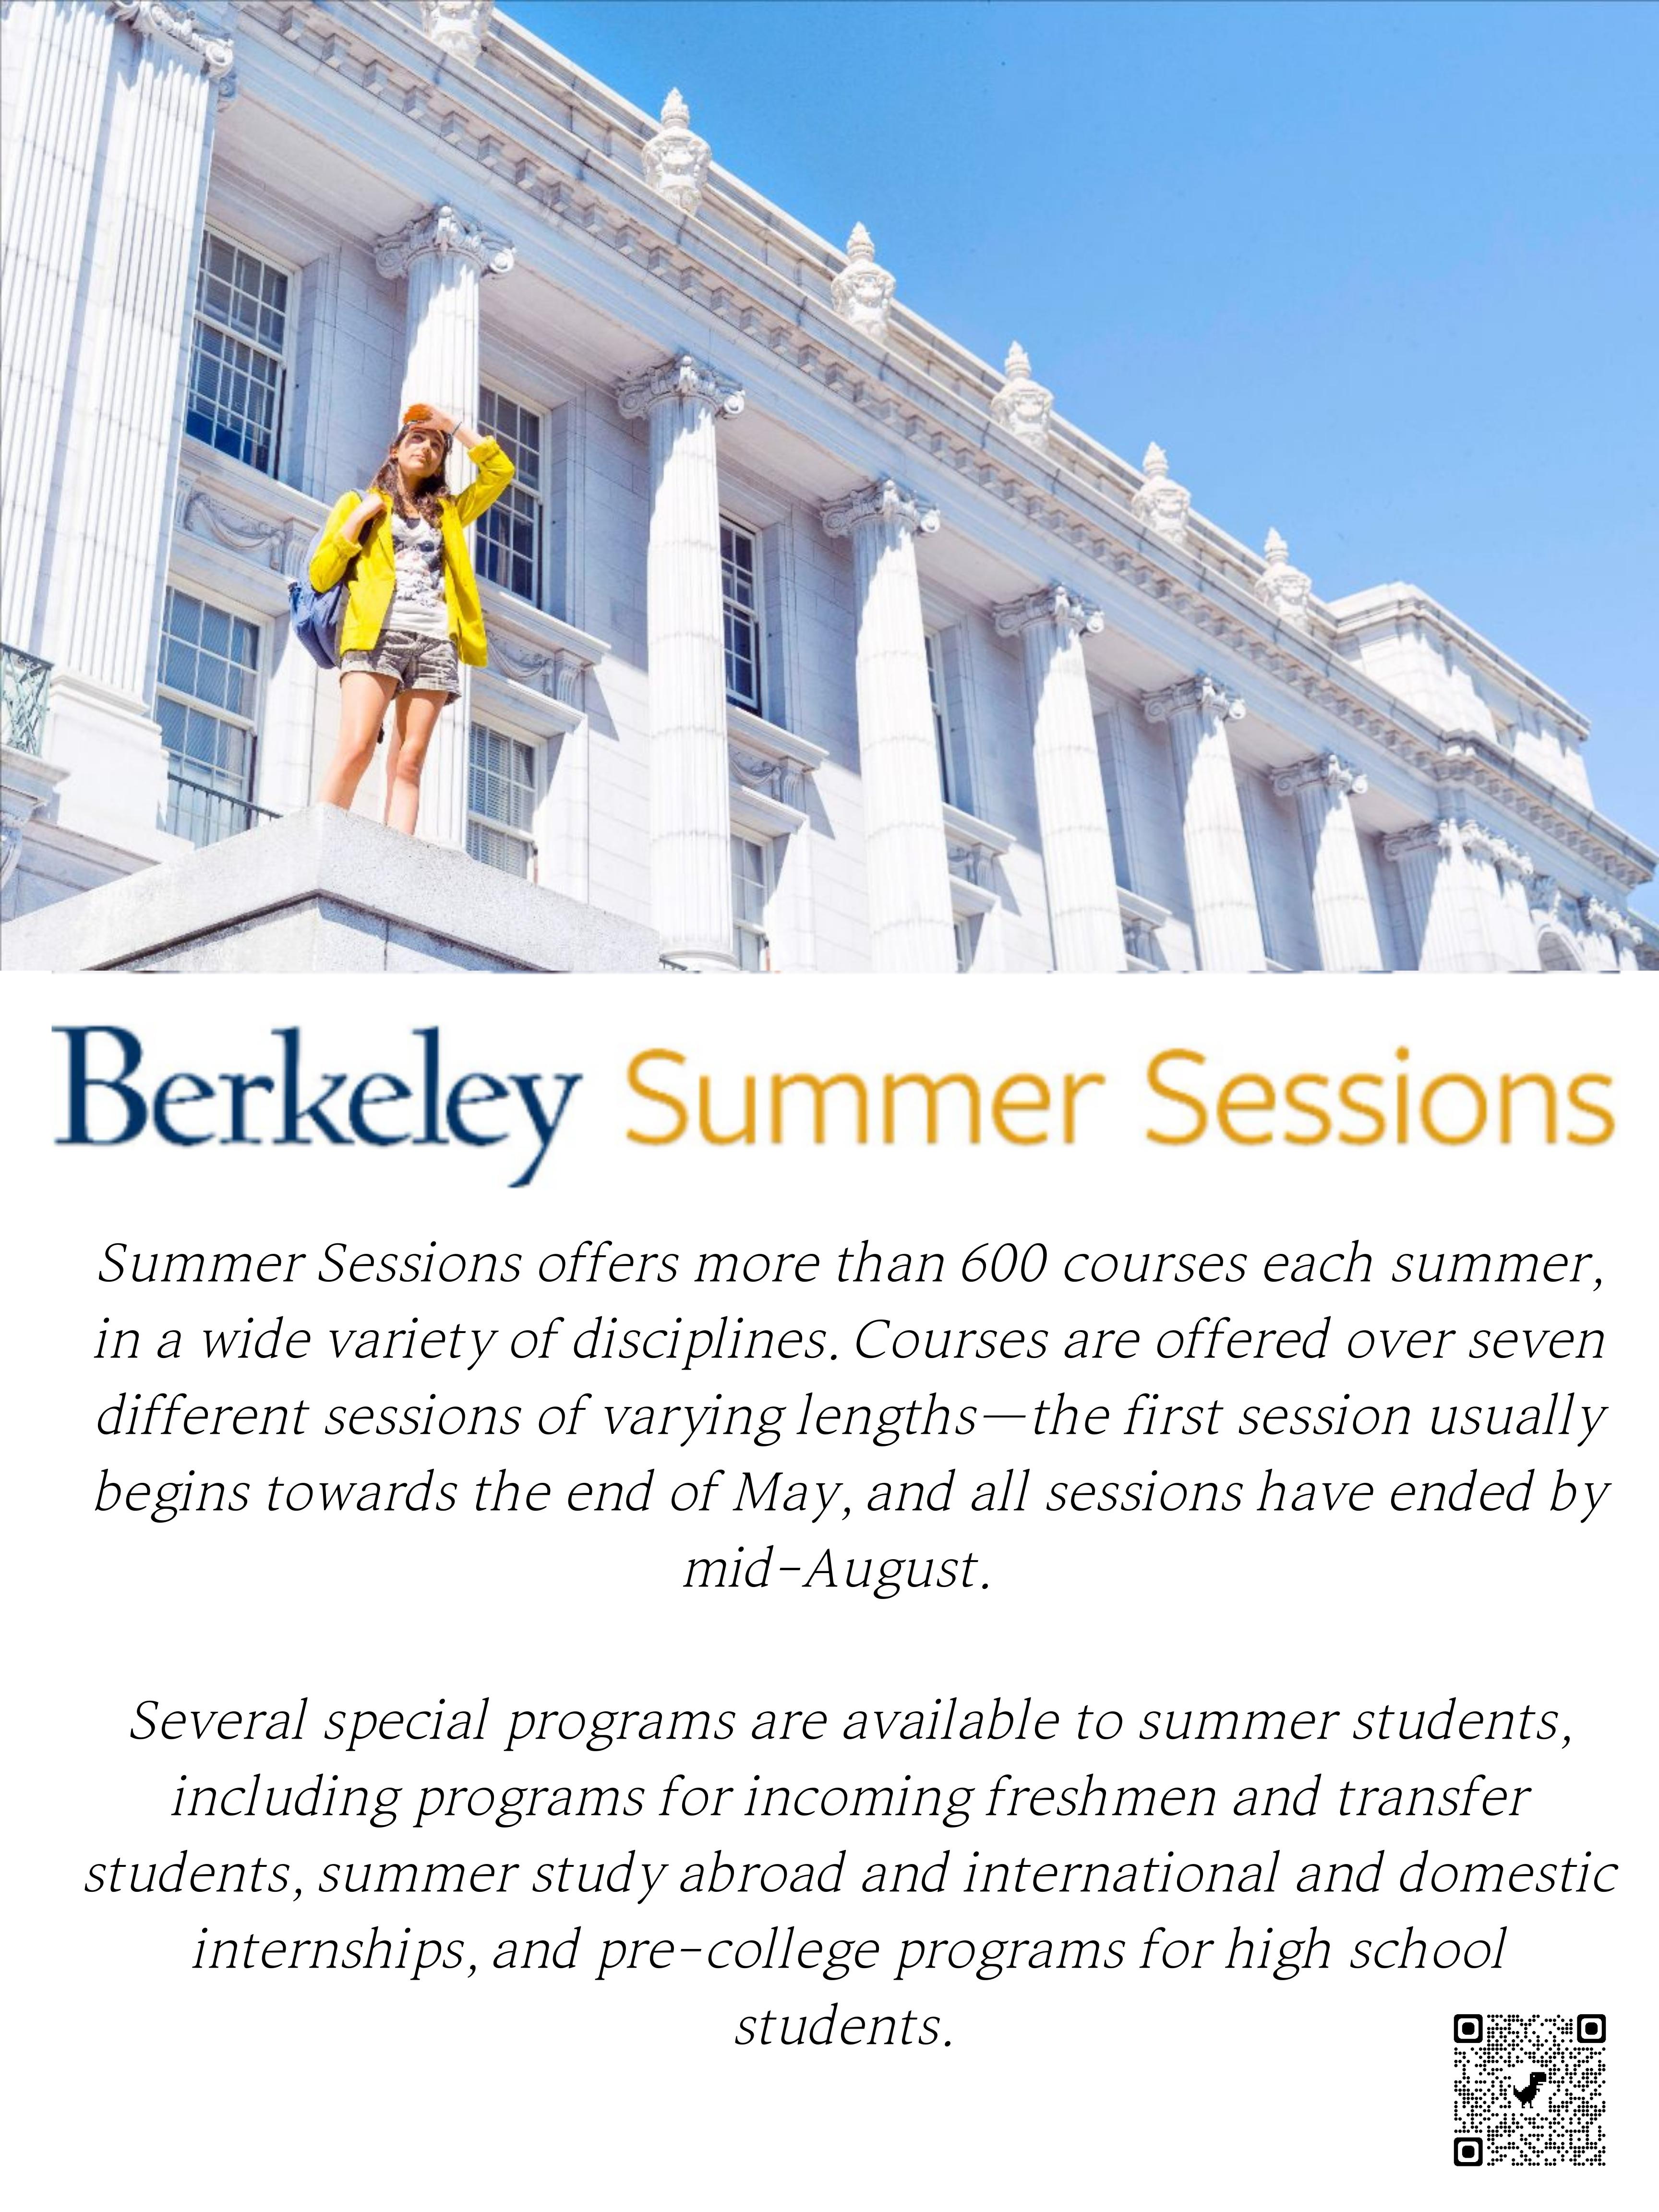 Join the UC Berkeley Summer Sessions Info Sessions OIA